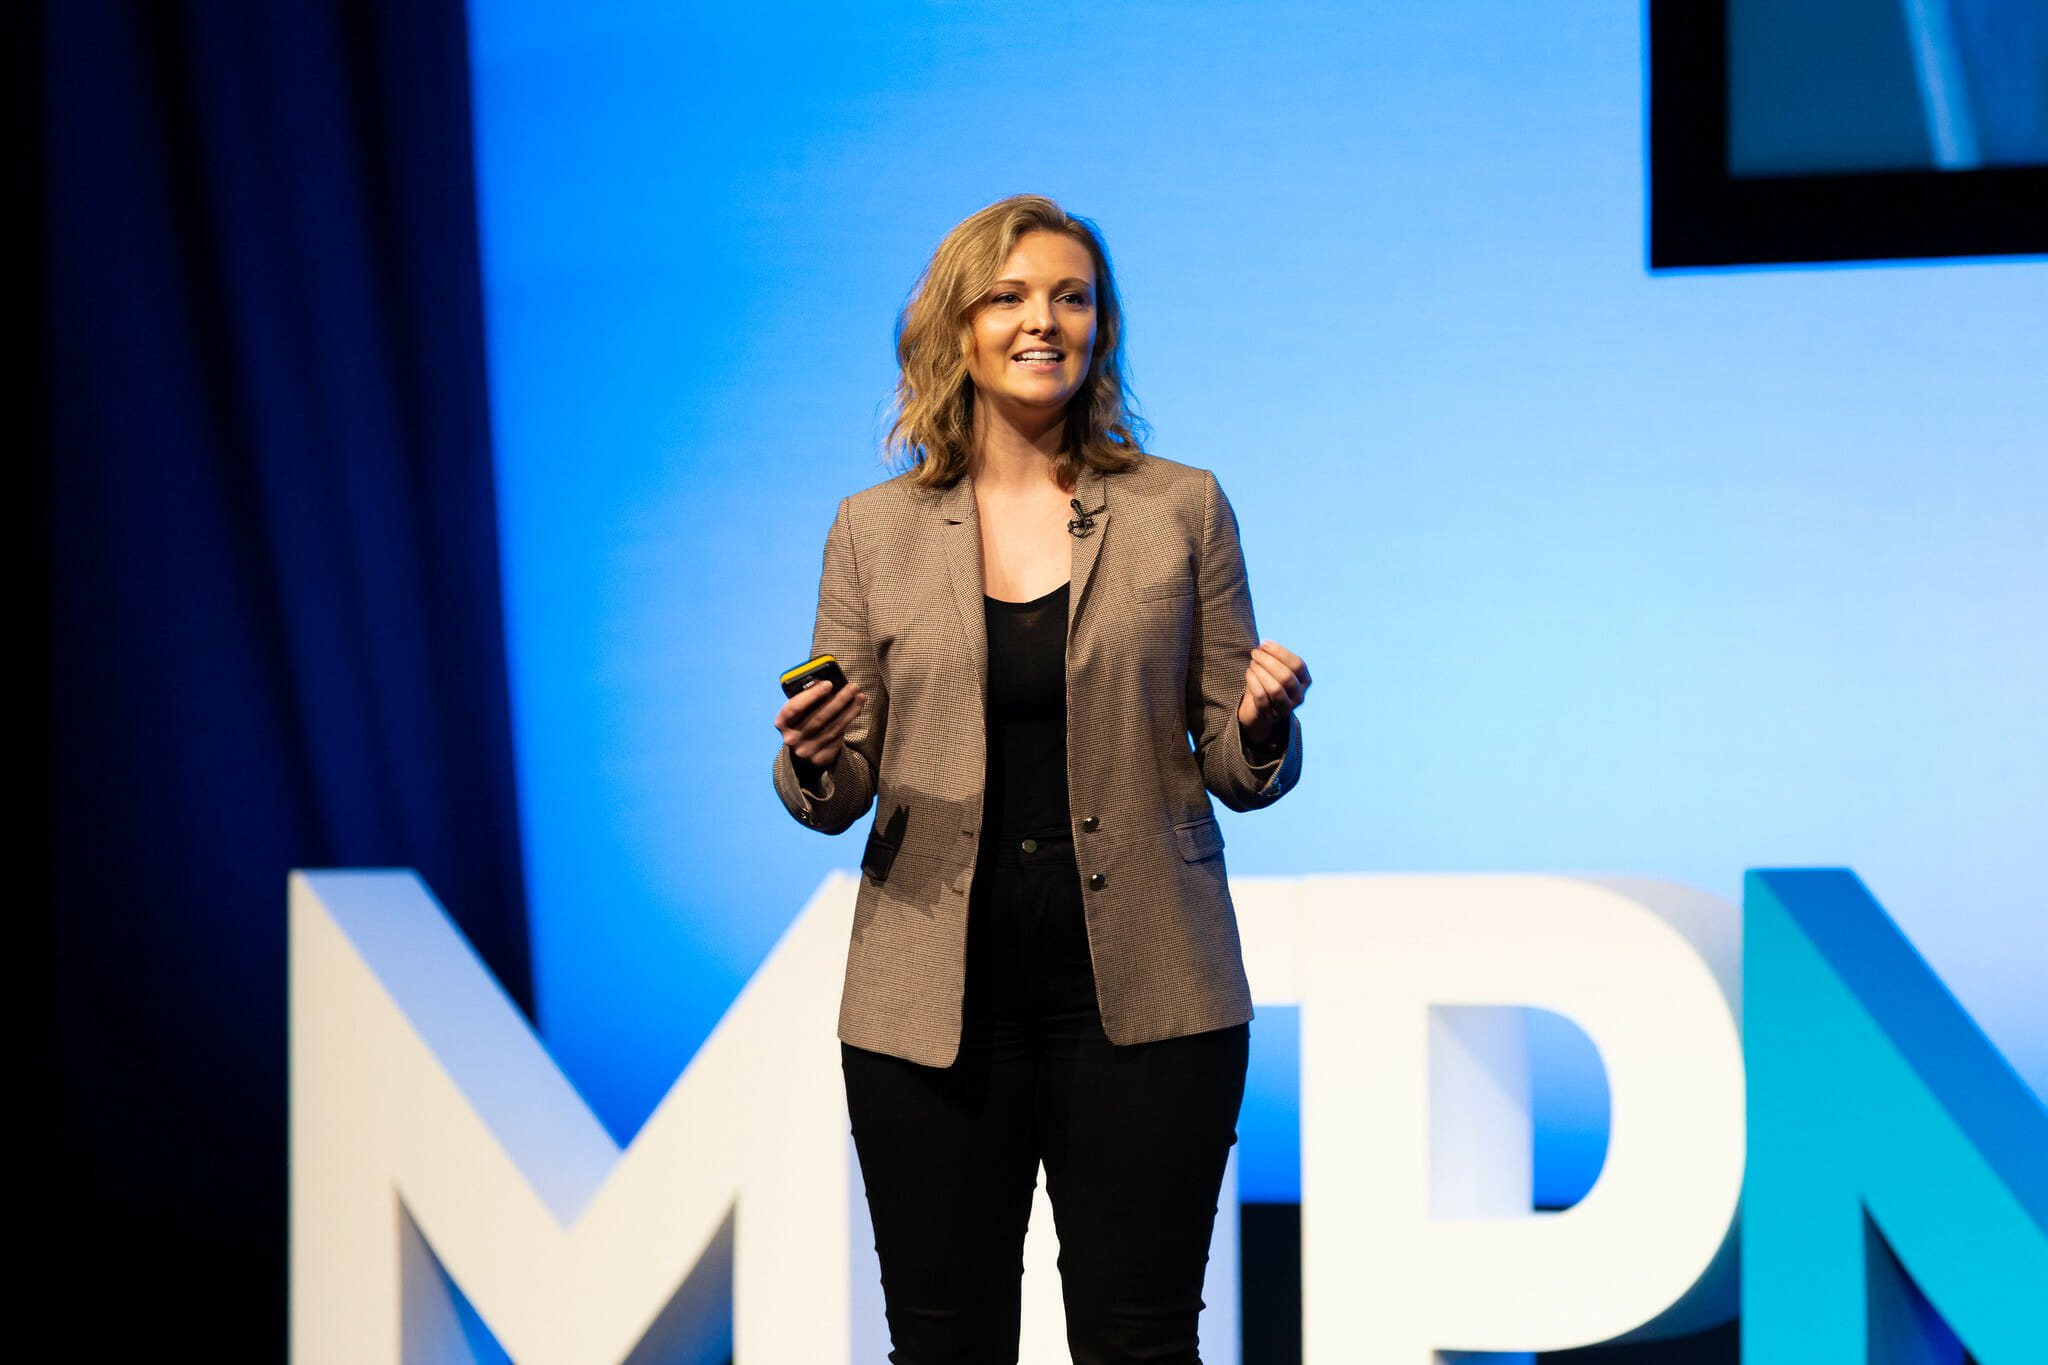 Melissa Perri Speaking at MTP Engage Manchester